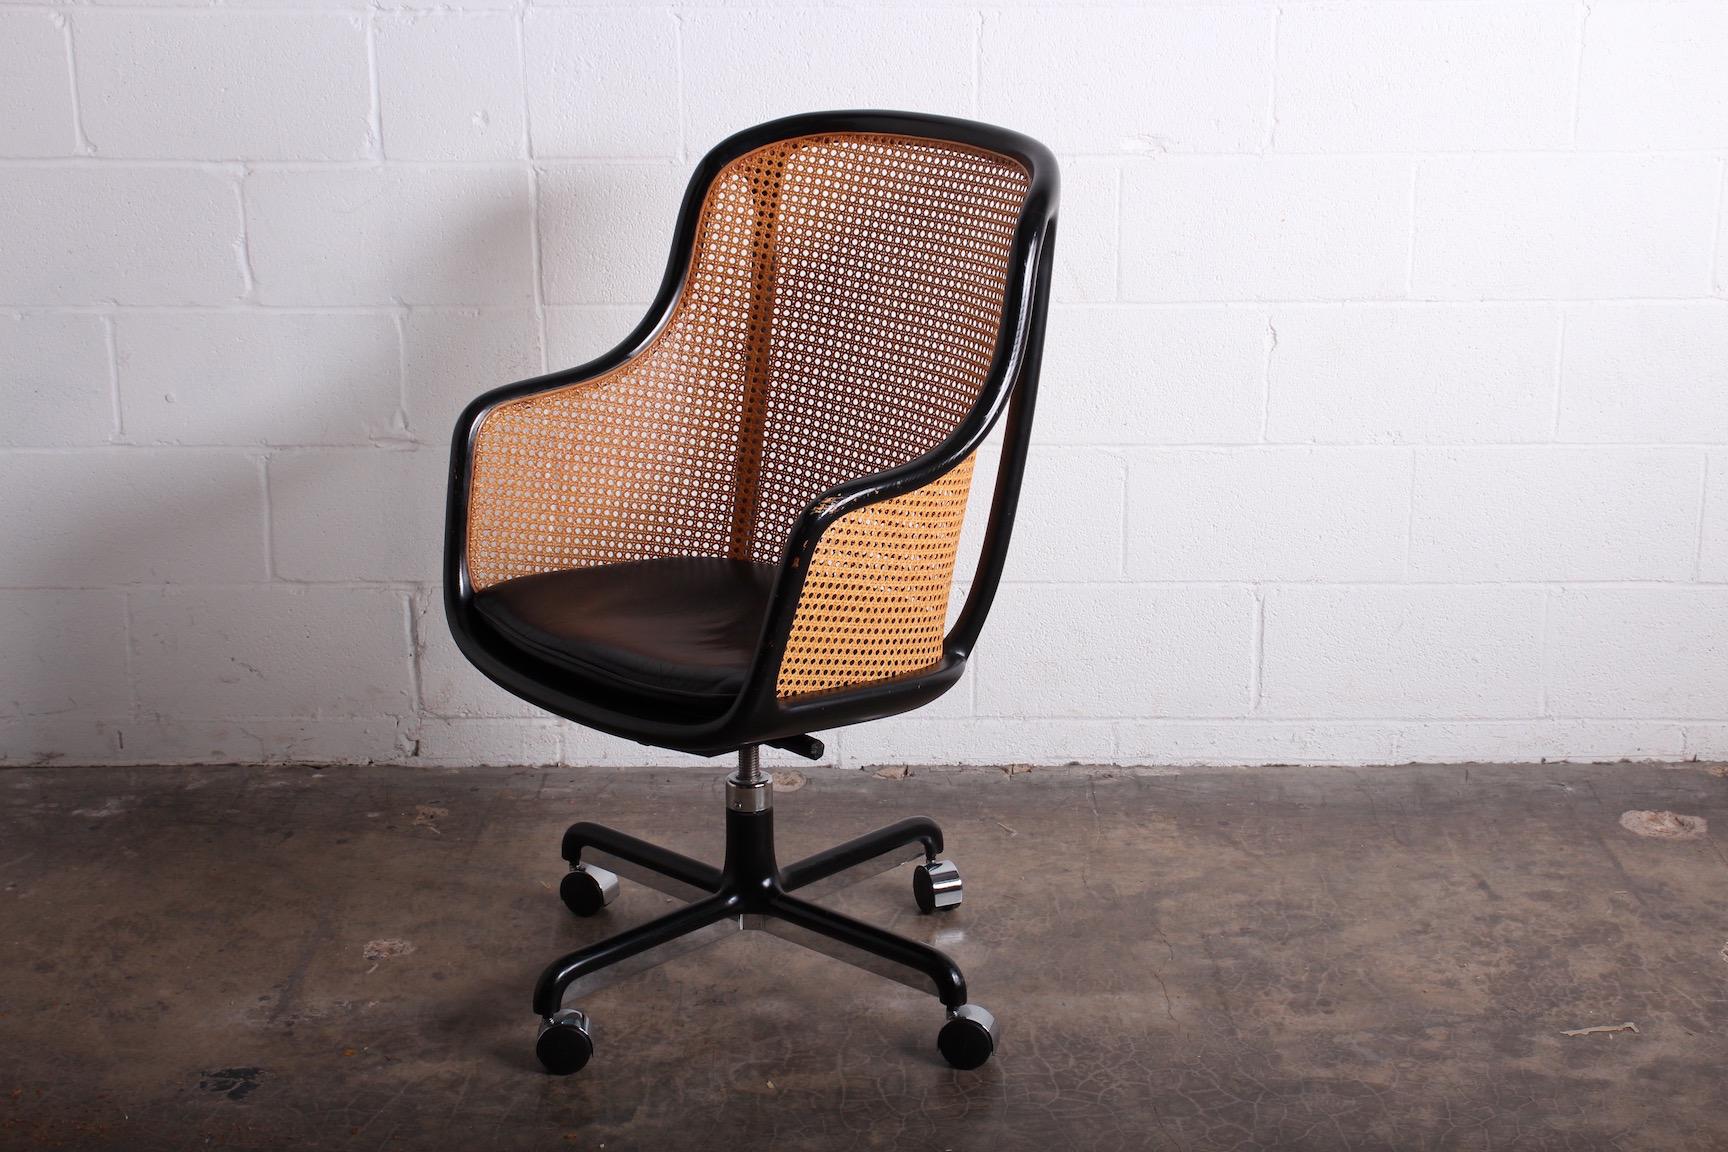 A fully caned desk chair with original black frame and original leather seat. Designed by Ward Bennett for Brickel.